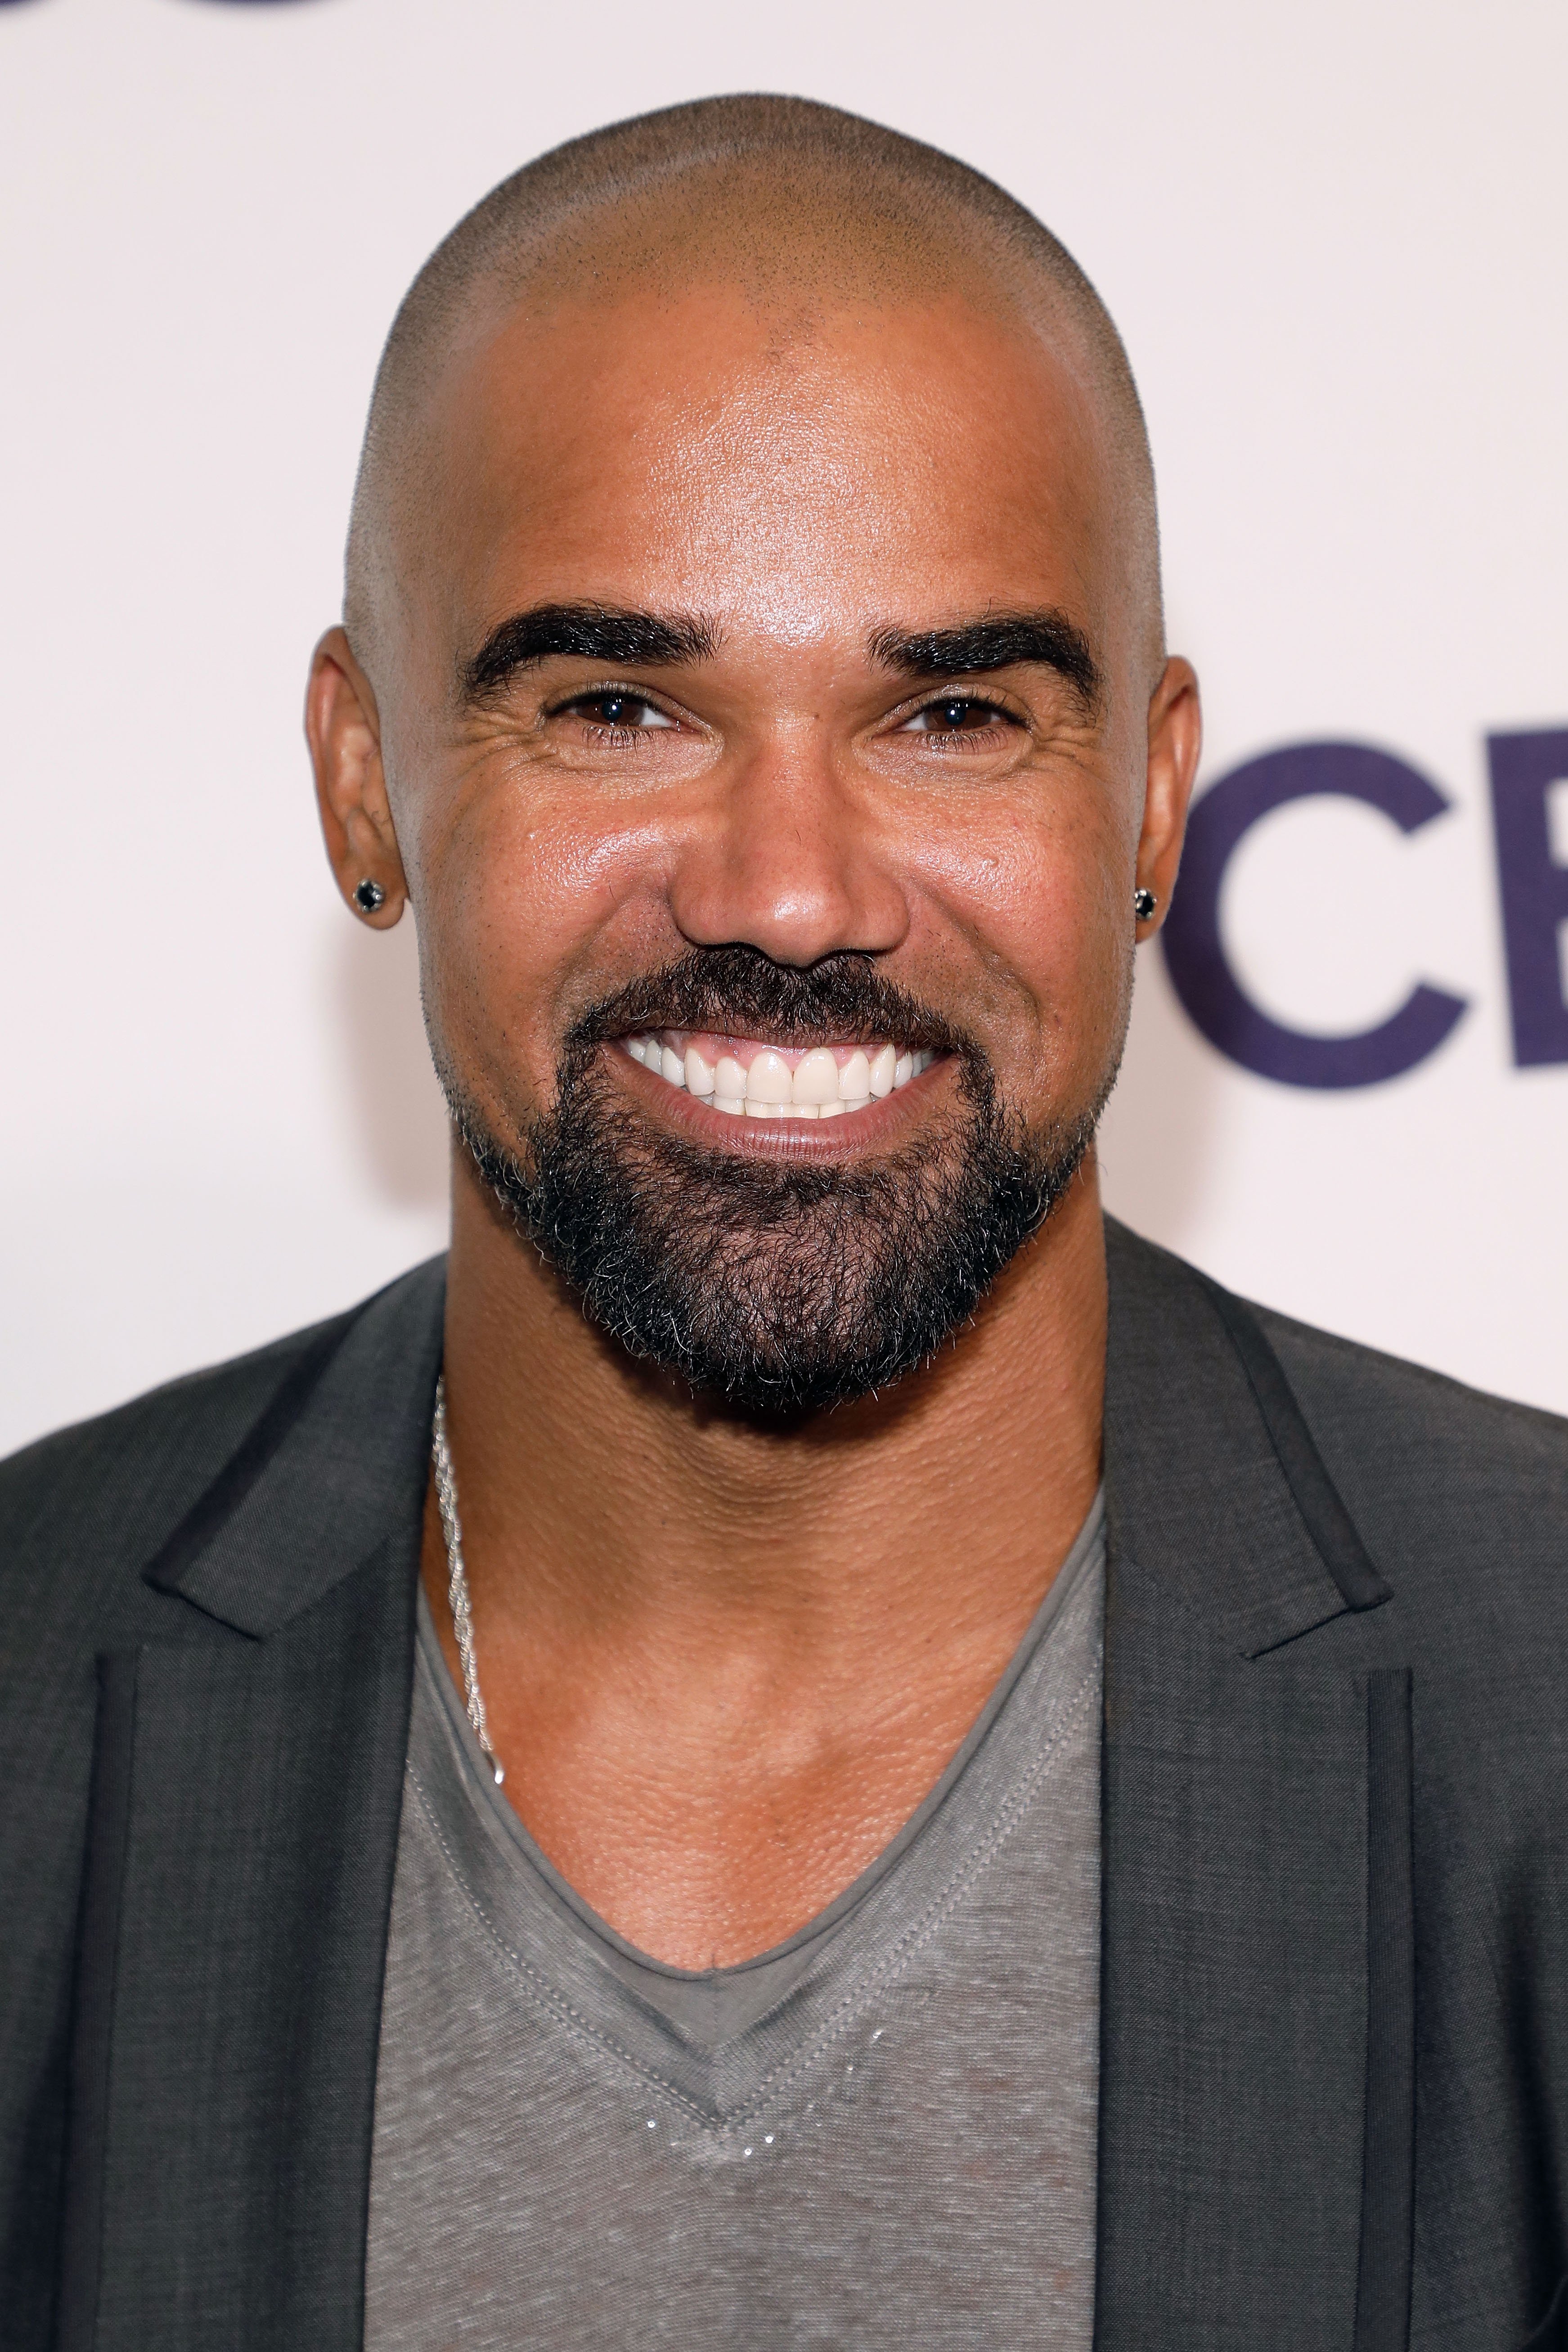 Shemar Moore attends the 2017 CBS Upfront at The Plaza Hotel on May 17, 2017, in New York City. | Source: Getty Images